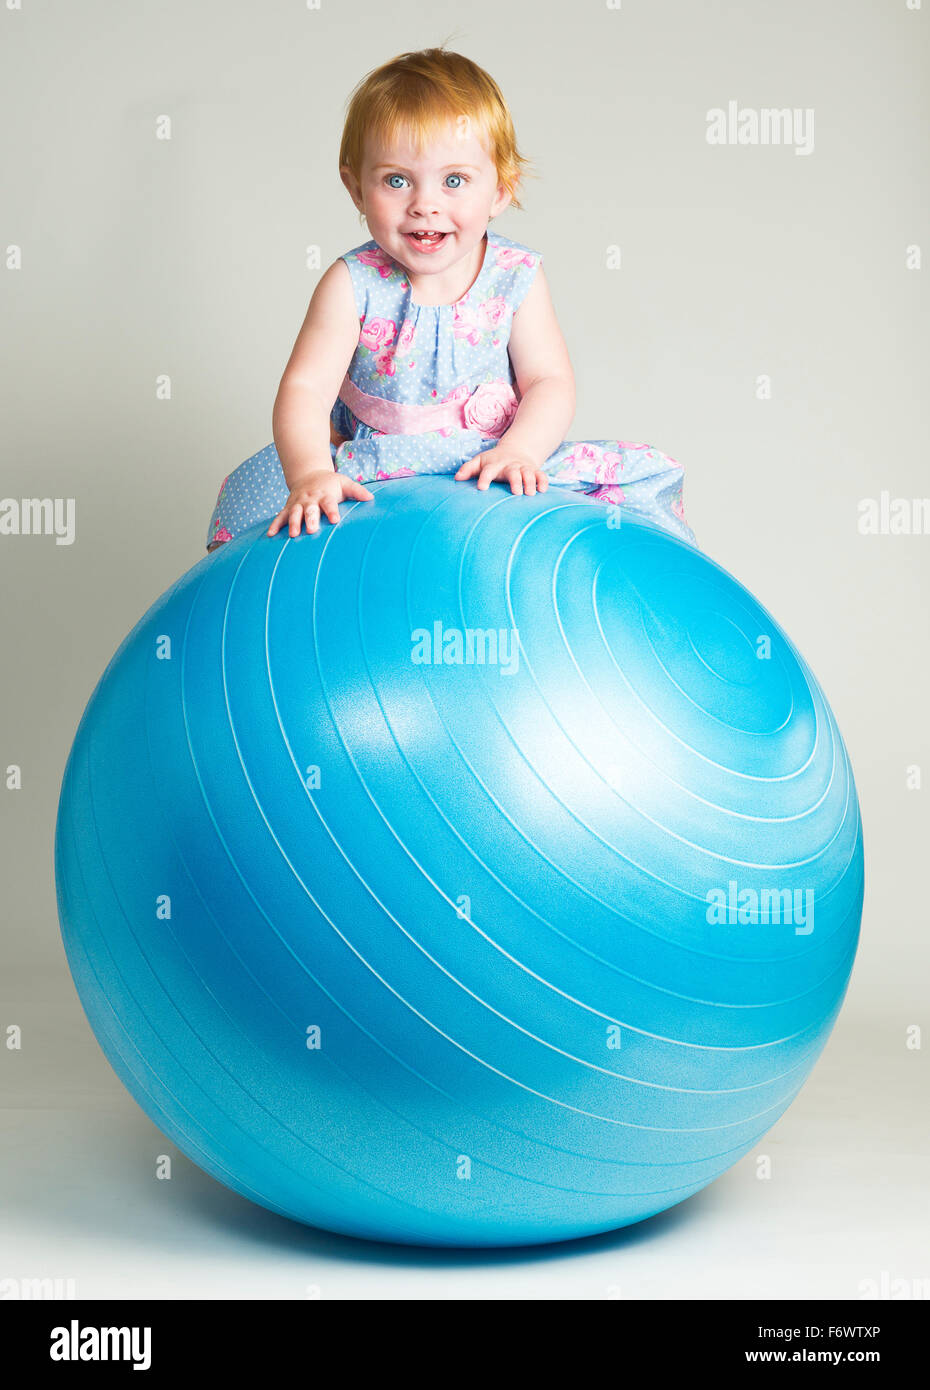 A cute little one year old girl sitting on a balance ball Stock Photo